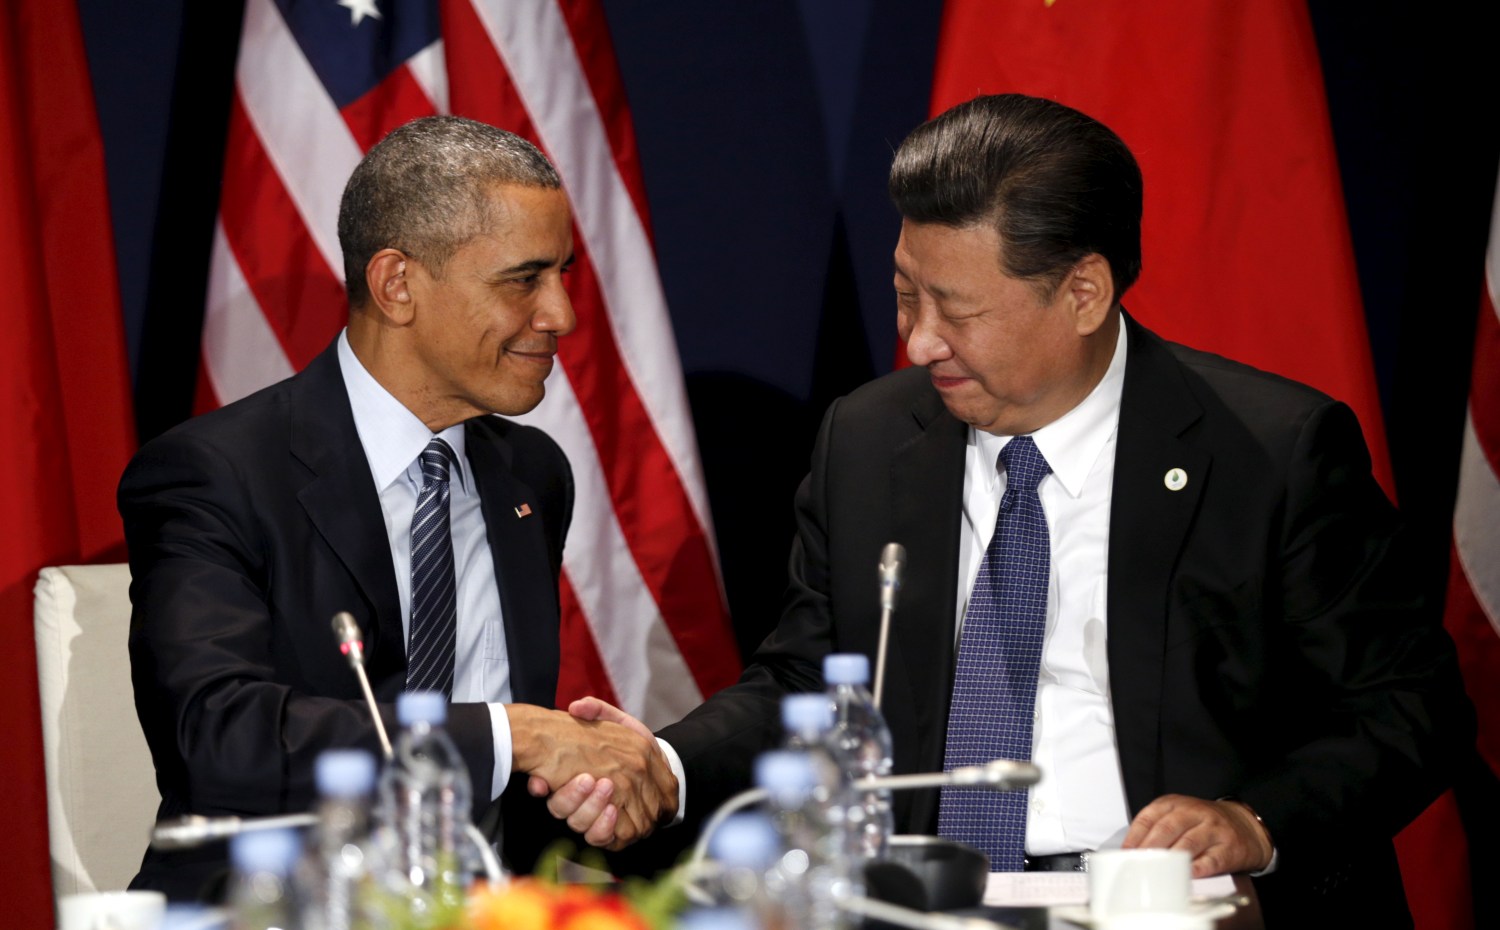 U.S. President Barack Obama shakes hands with Chinese President Xi Jinping during their meeting at the start of the climate summit in Paris November 30, 2015.